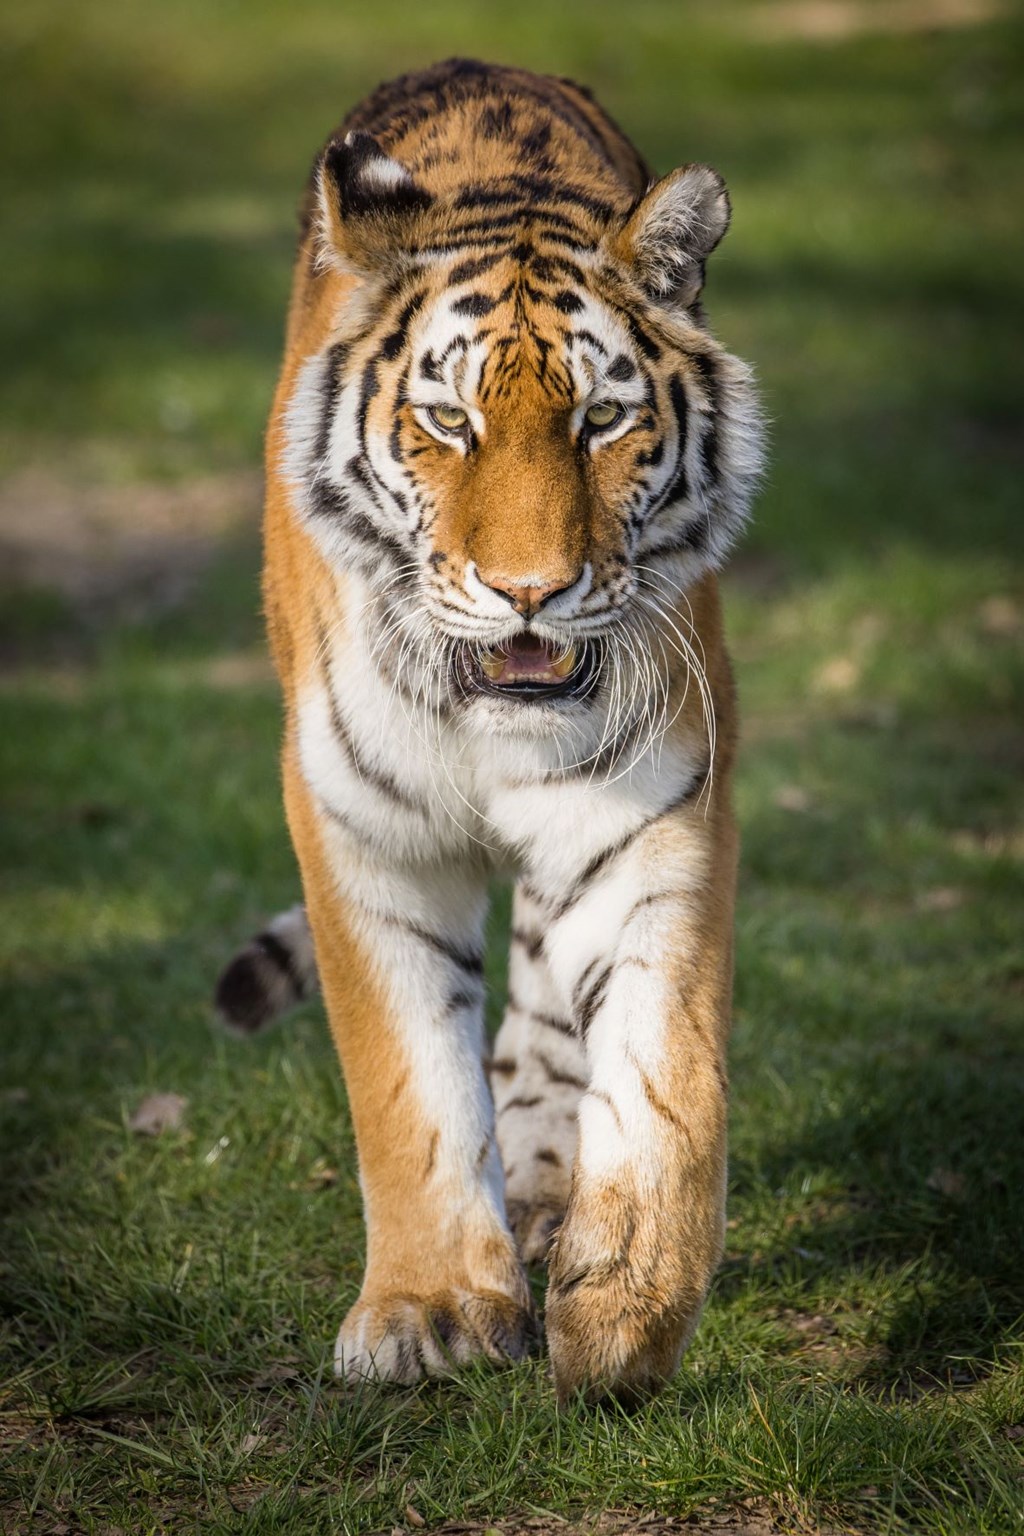 Tiger walks on the grass towards camera, her mouth slightly open and teeth showing 